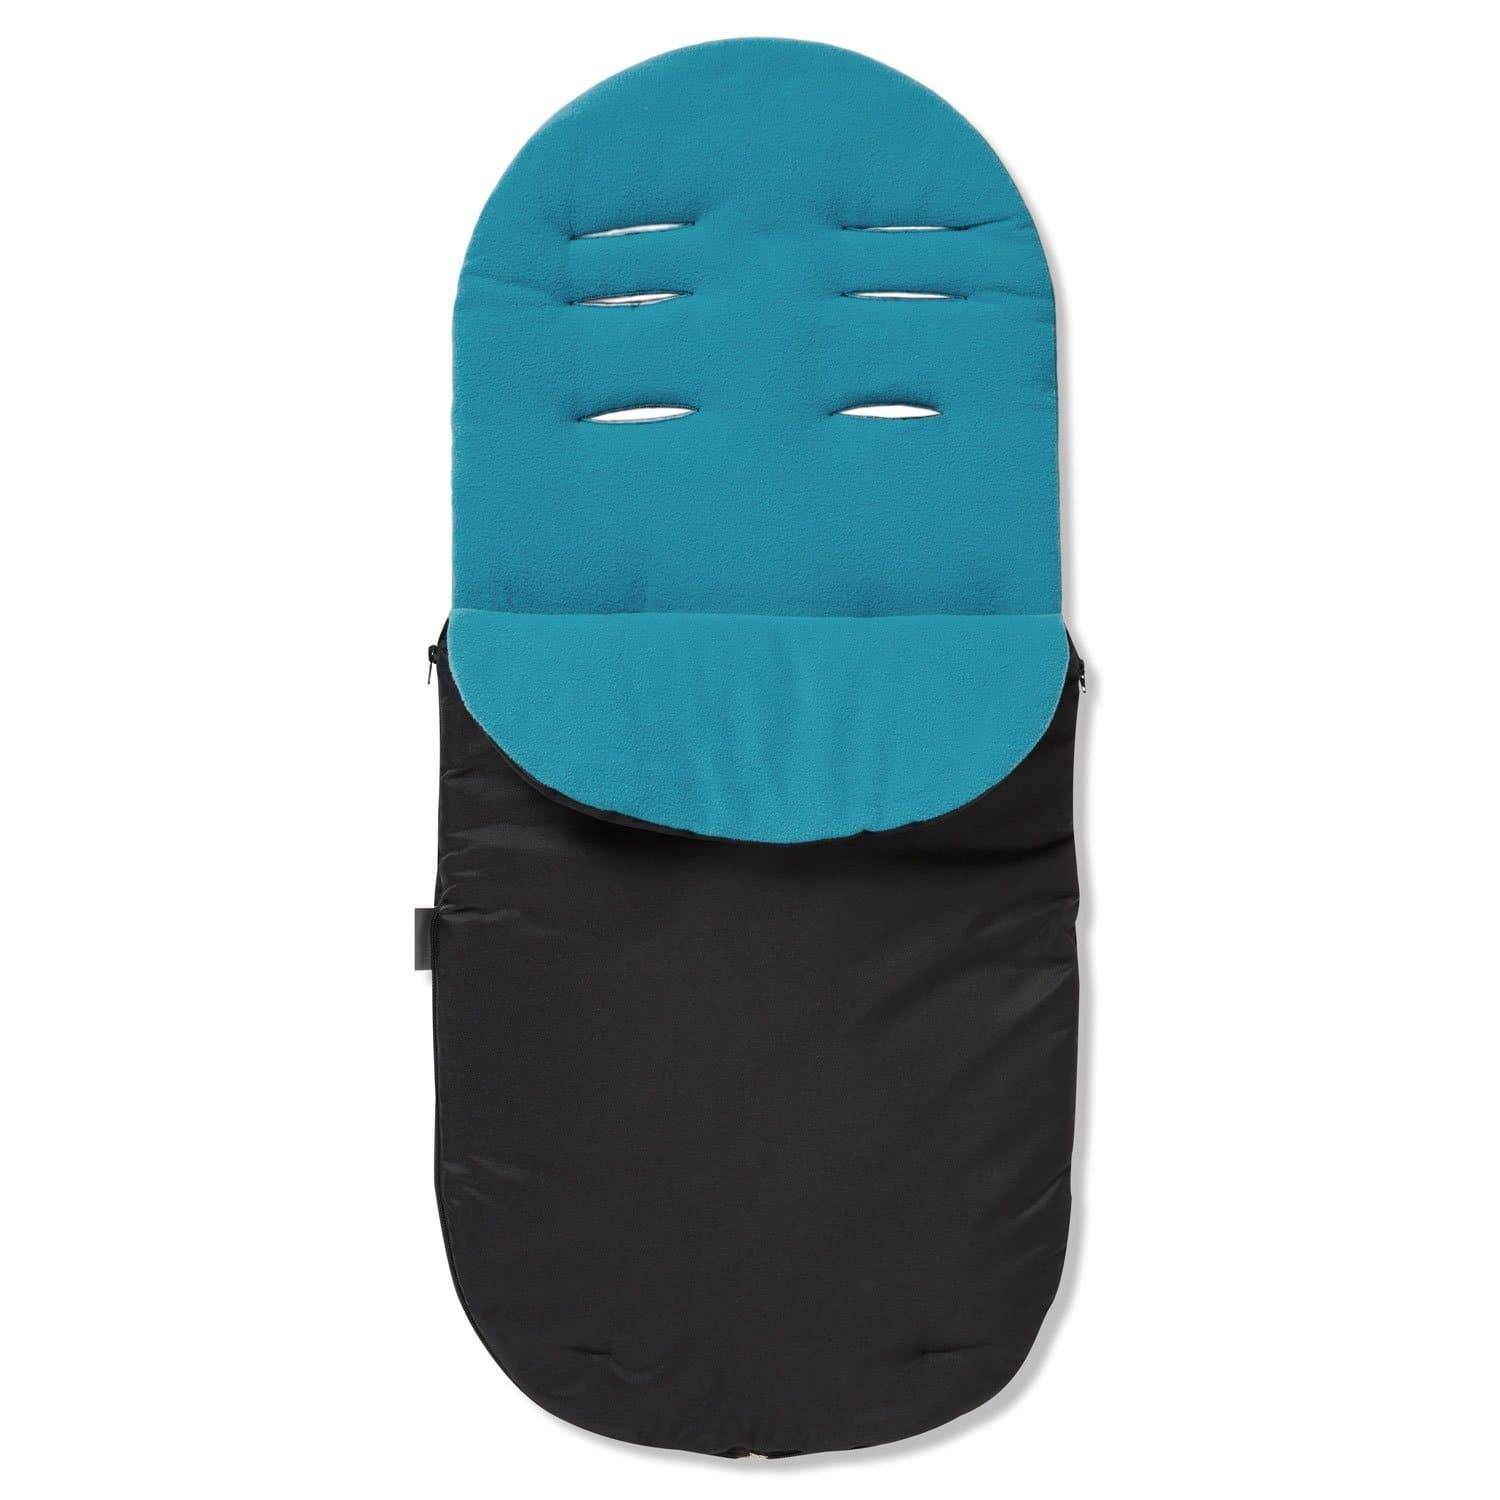 Footmuff / Cosy Toes Compatible with BabySun - For Your Little One